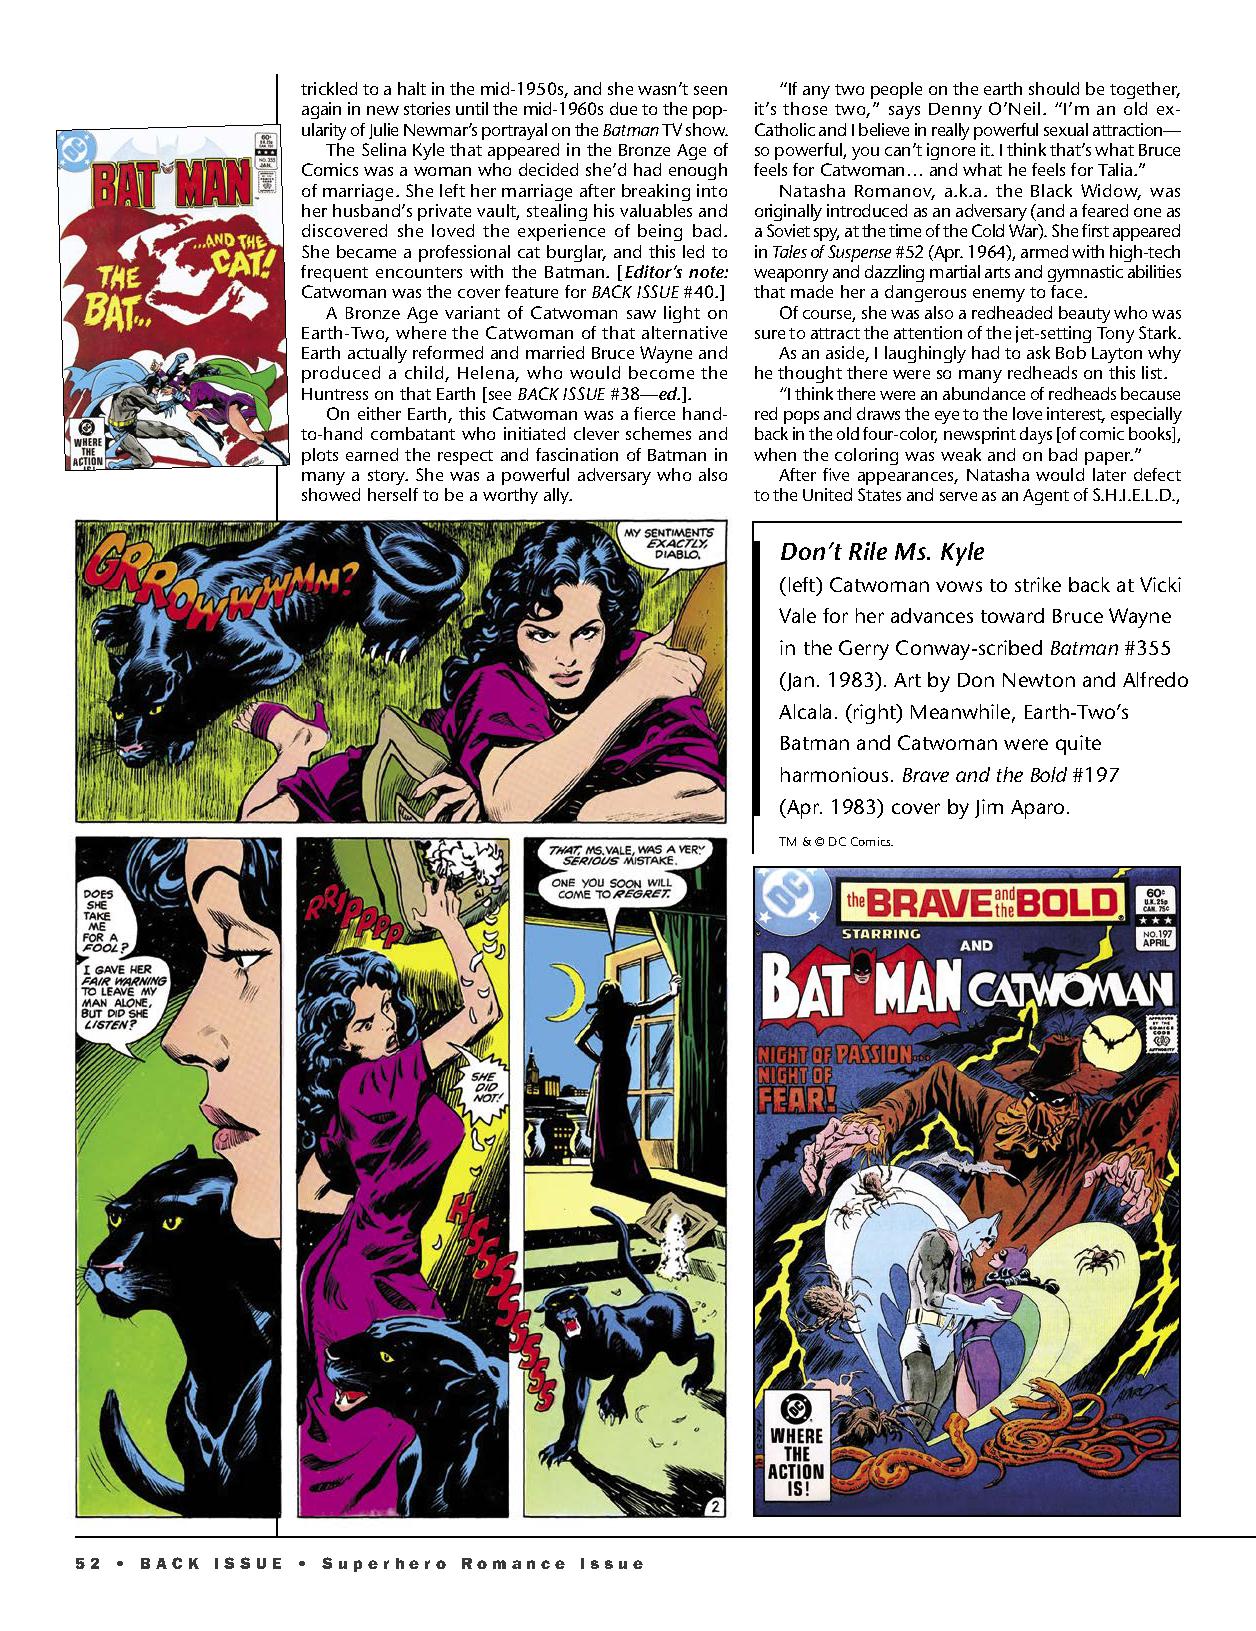 Read online Back Issue comic -  Issue #123 - 54